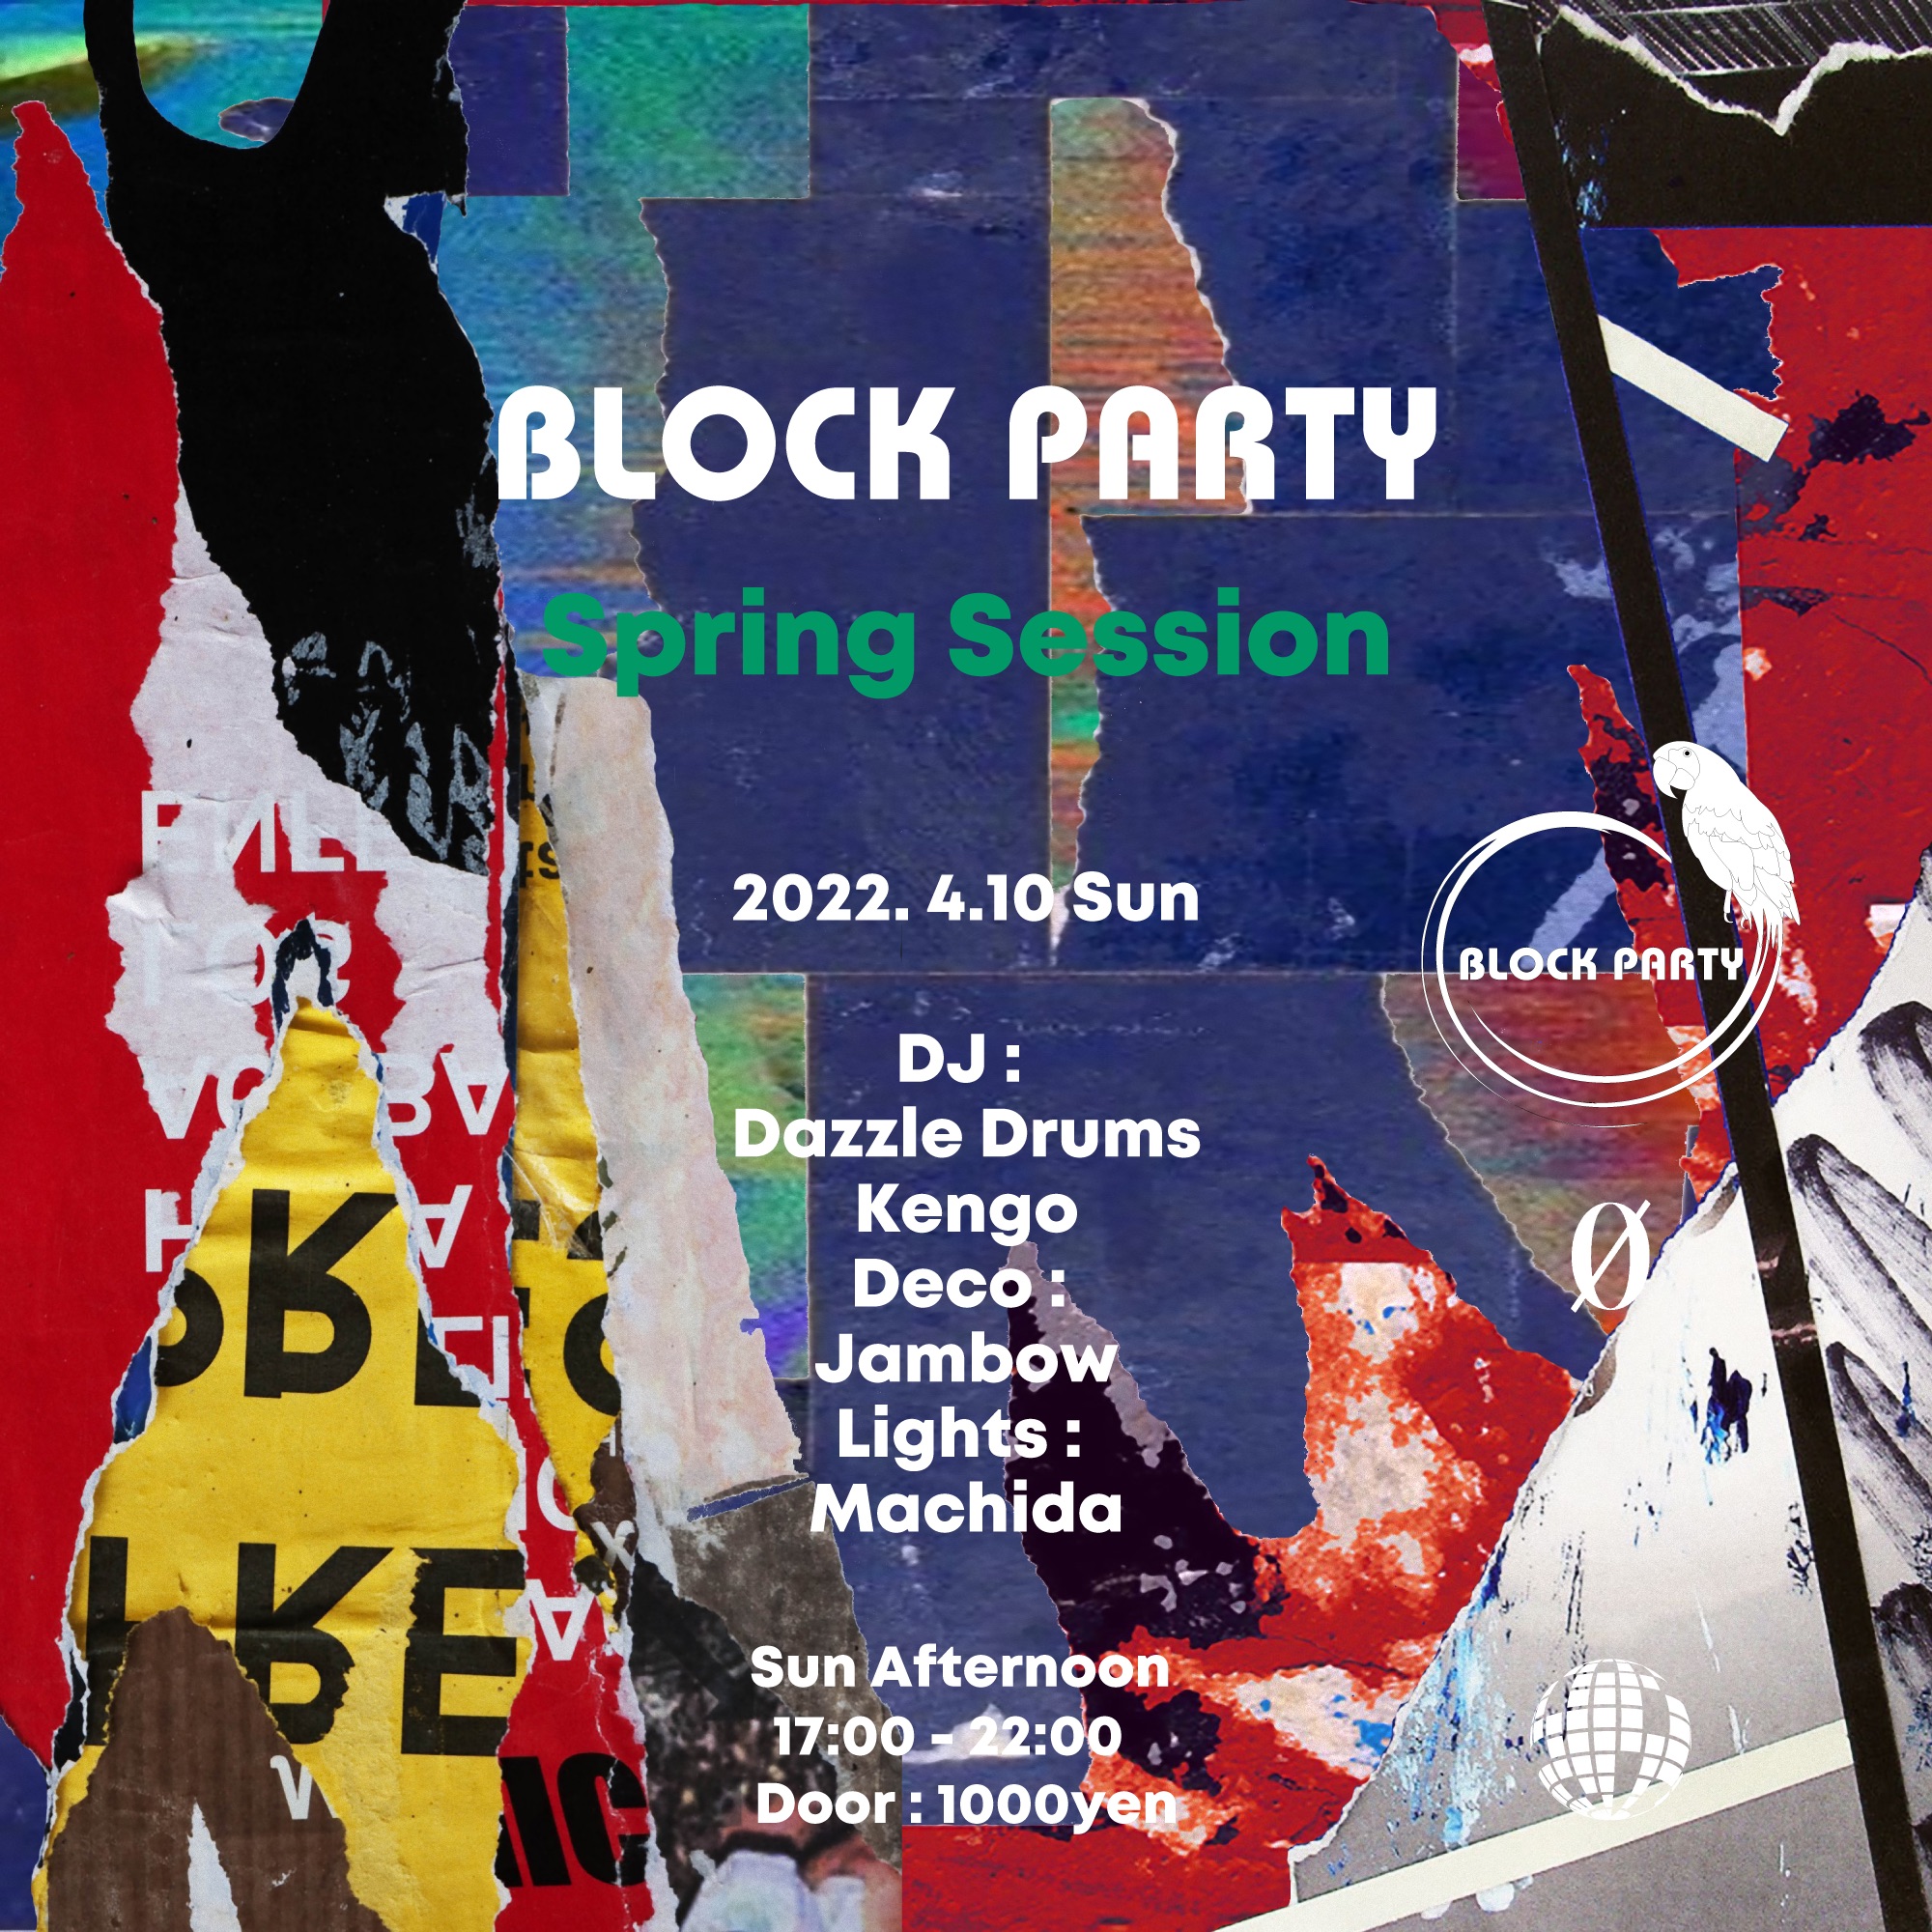 Block Party “Spring”